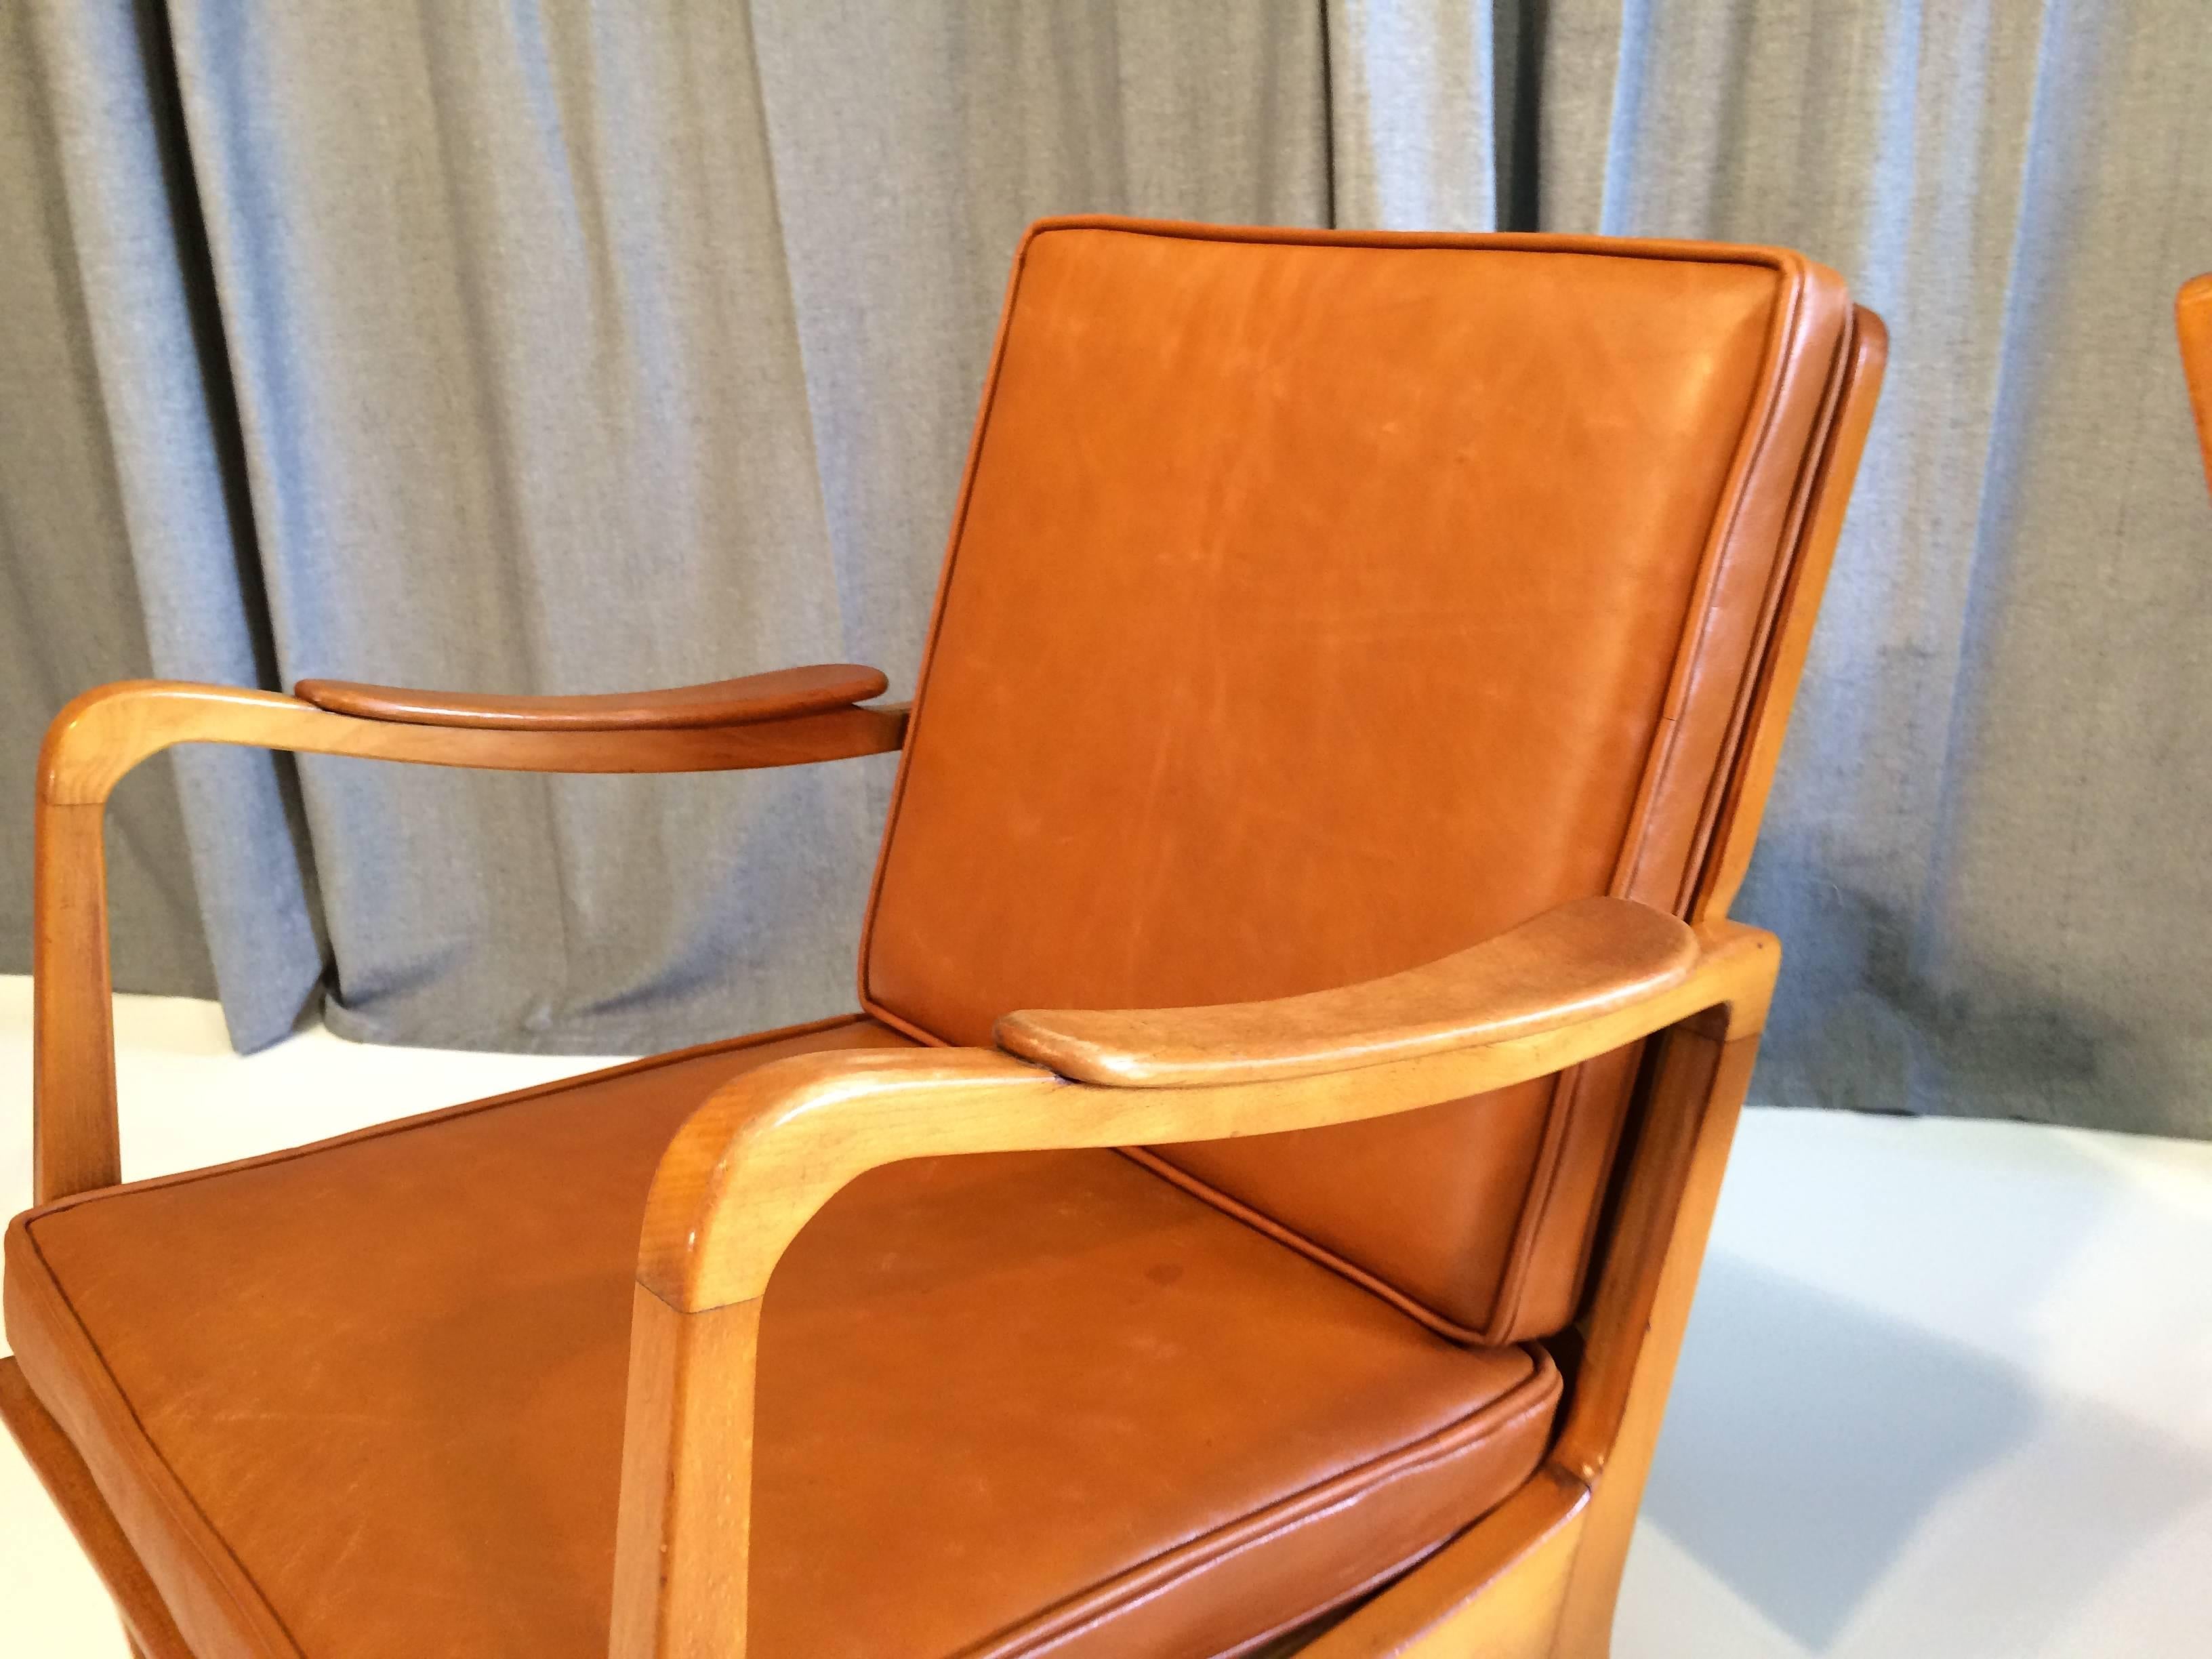 Pair of Danish armchairs made of solid birch, come with nice cognac leather cushions.